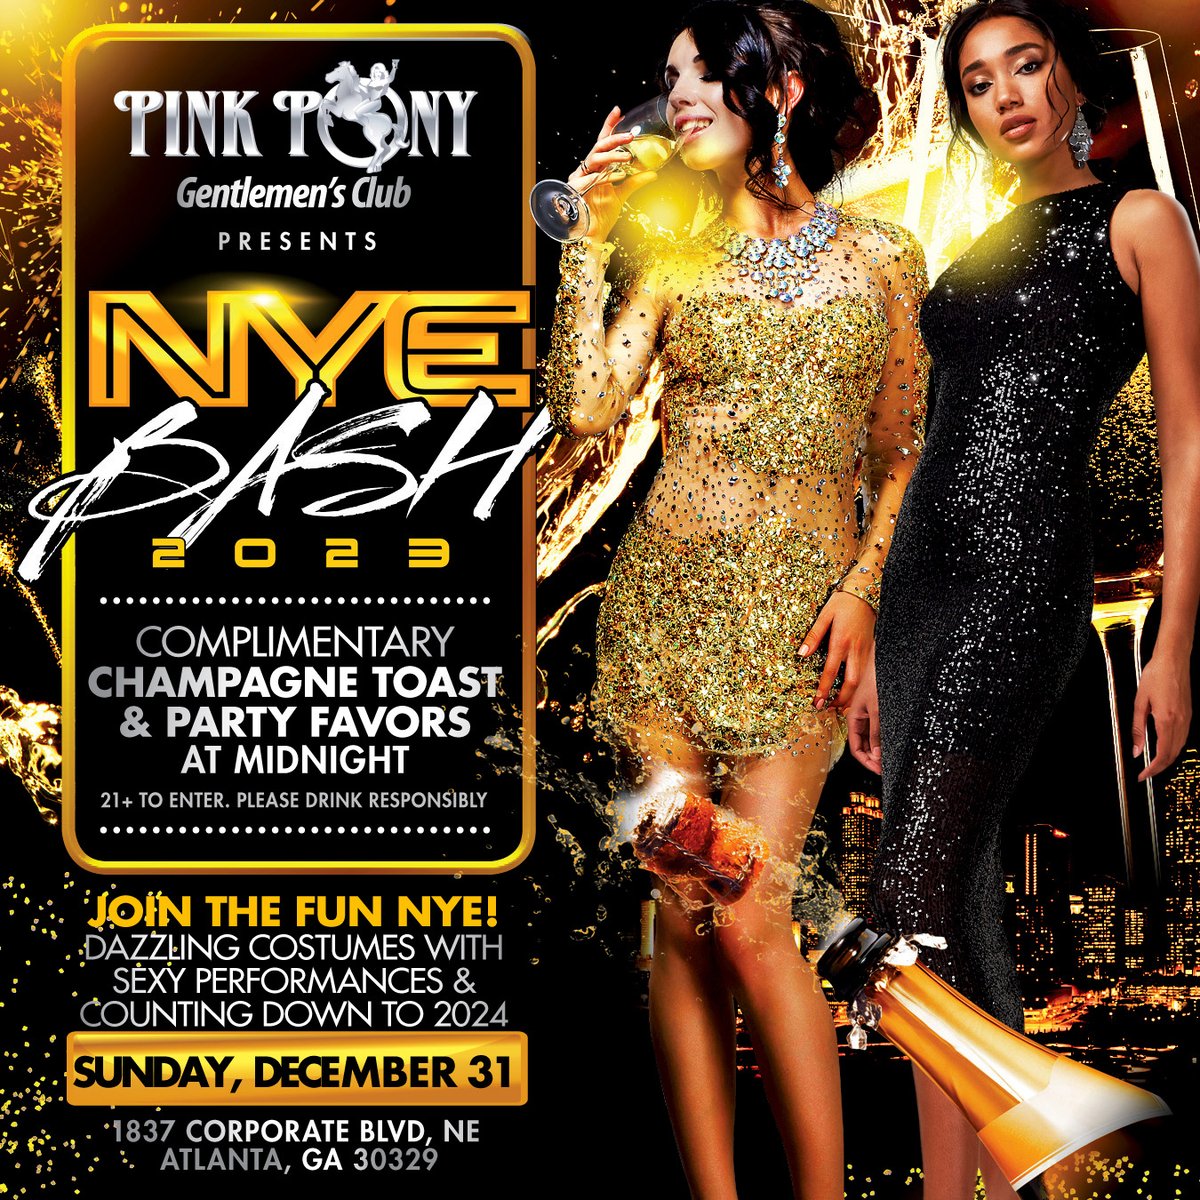 Ring in 2024 with a #night2remember this Sunday night NEW YEARS EVE Party at the world-famous Pink Pony Gentlemen’s club w/ free champagne toast @ midnight #pinkponyatl #atlnightlife #pinkpony #saturday #atlanta #newyearseve2024 #Atlanta